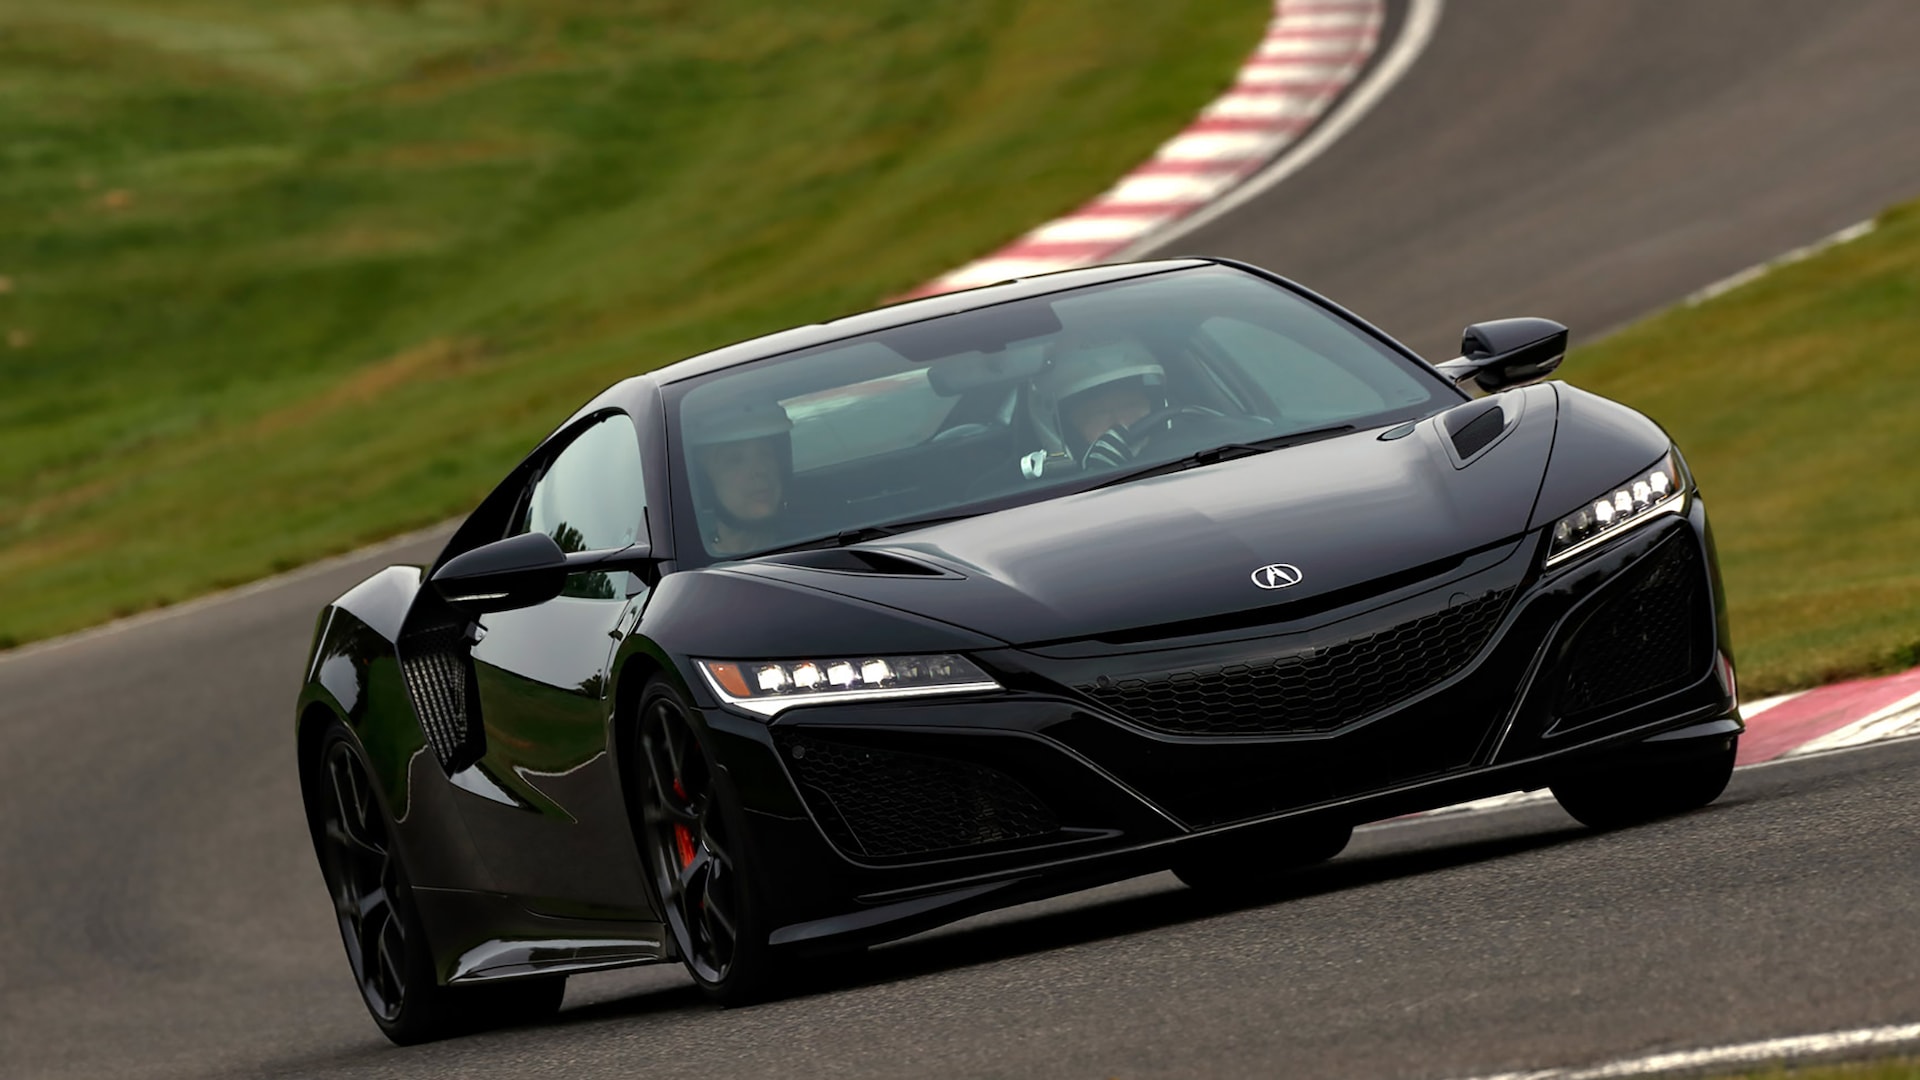 First Drive: 2019 Acura NSX